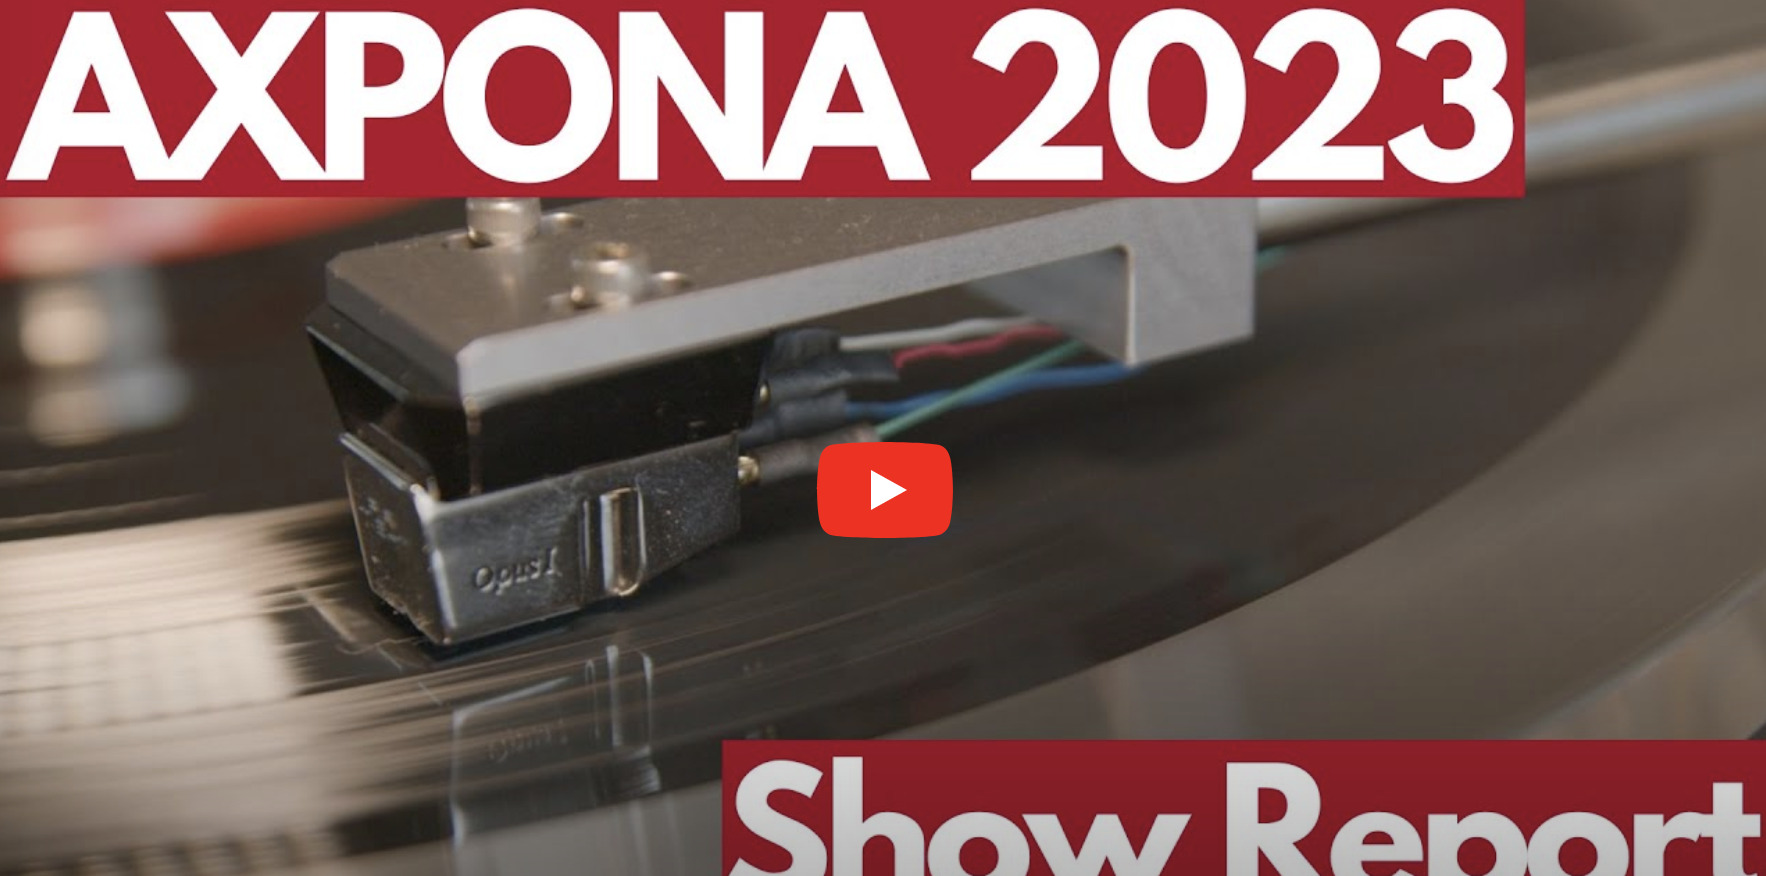 Who was the Stand Out? | AXPONA 2023 Show Report